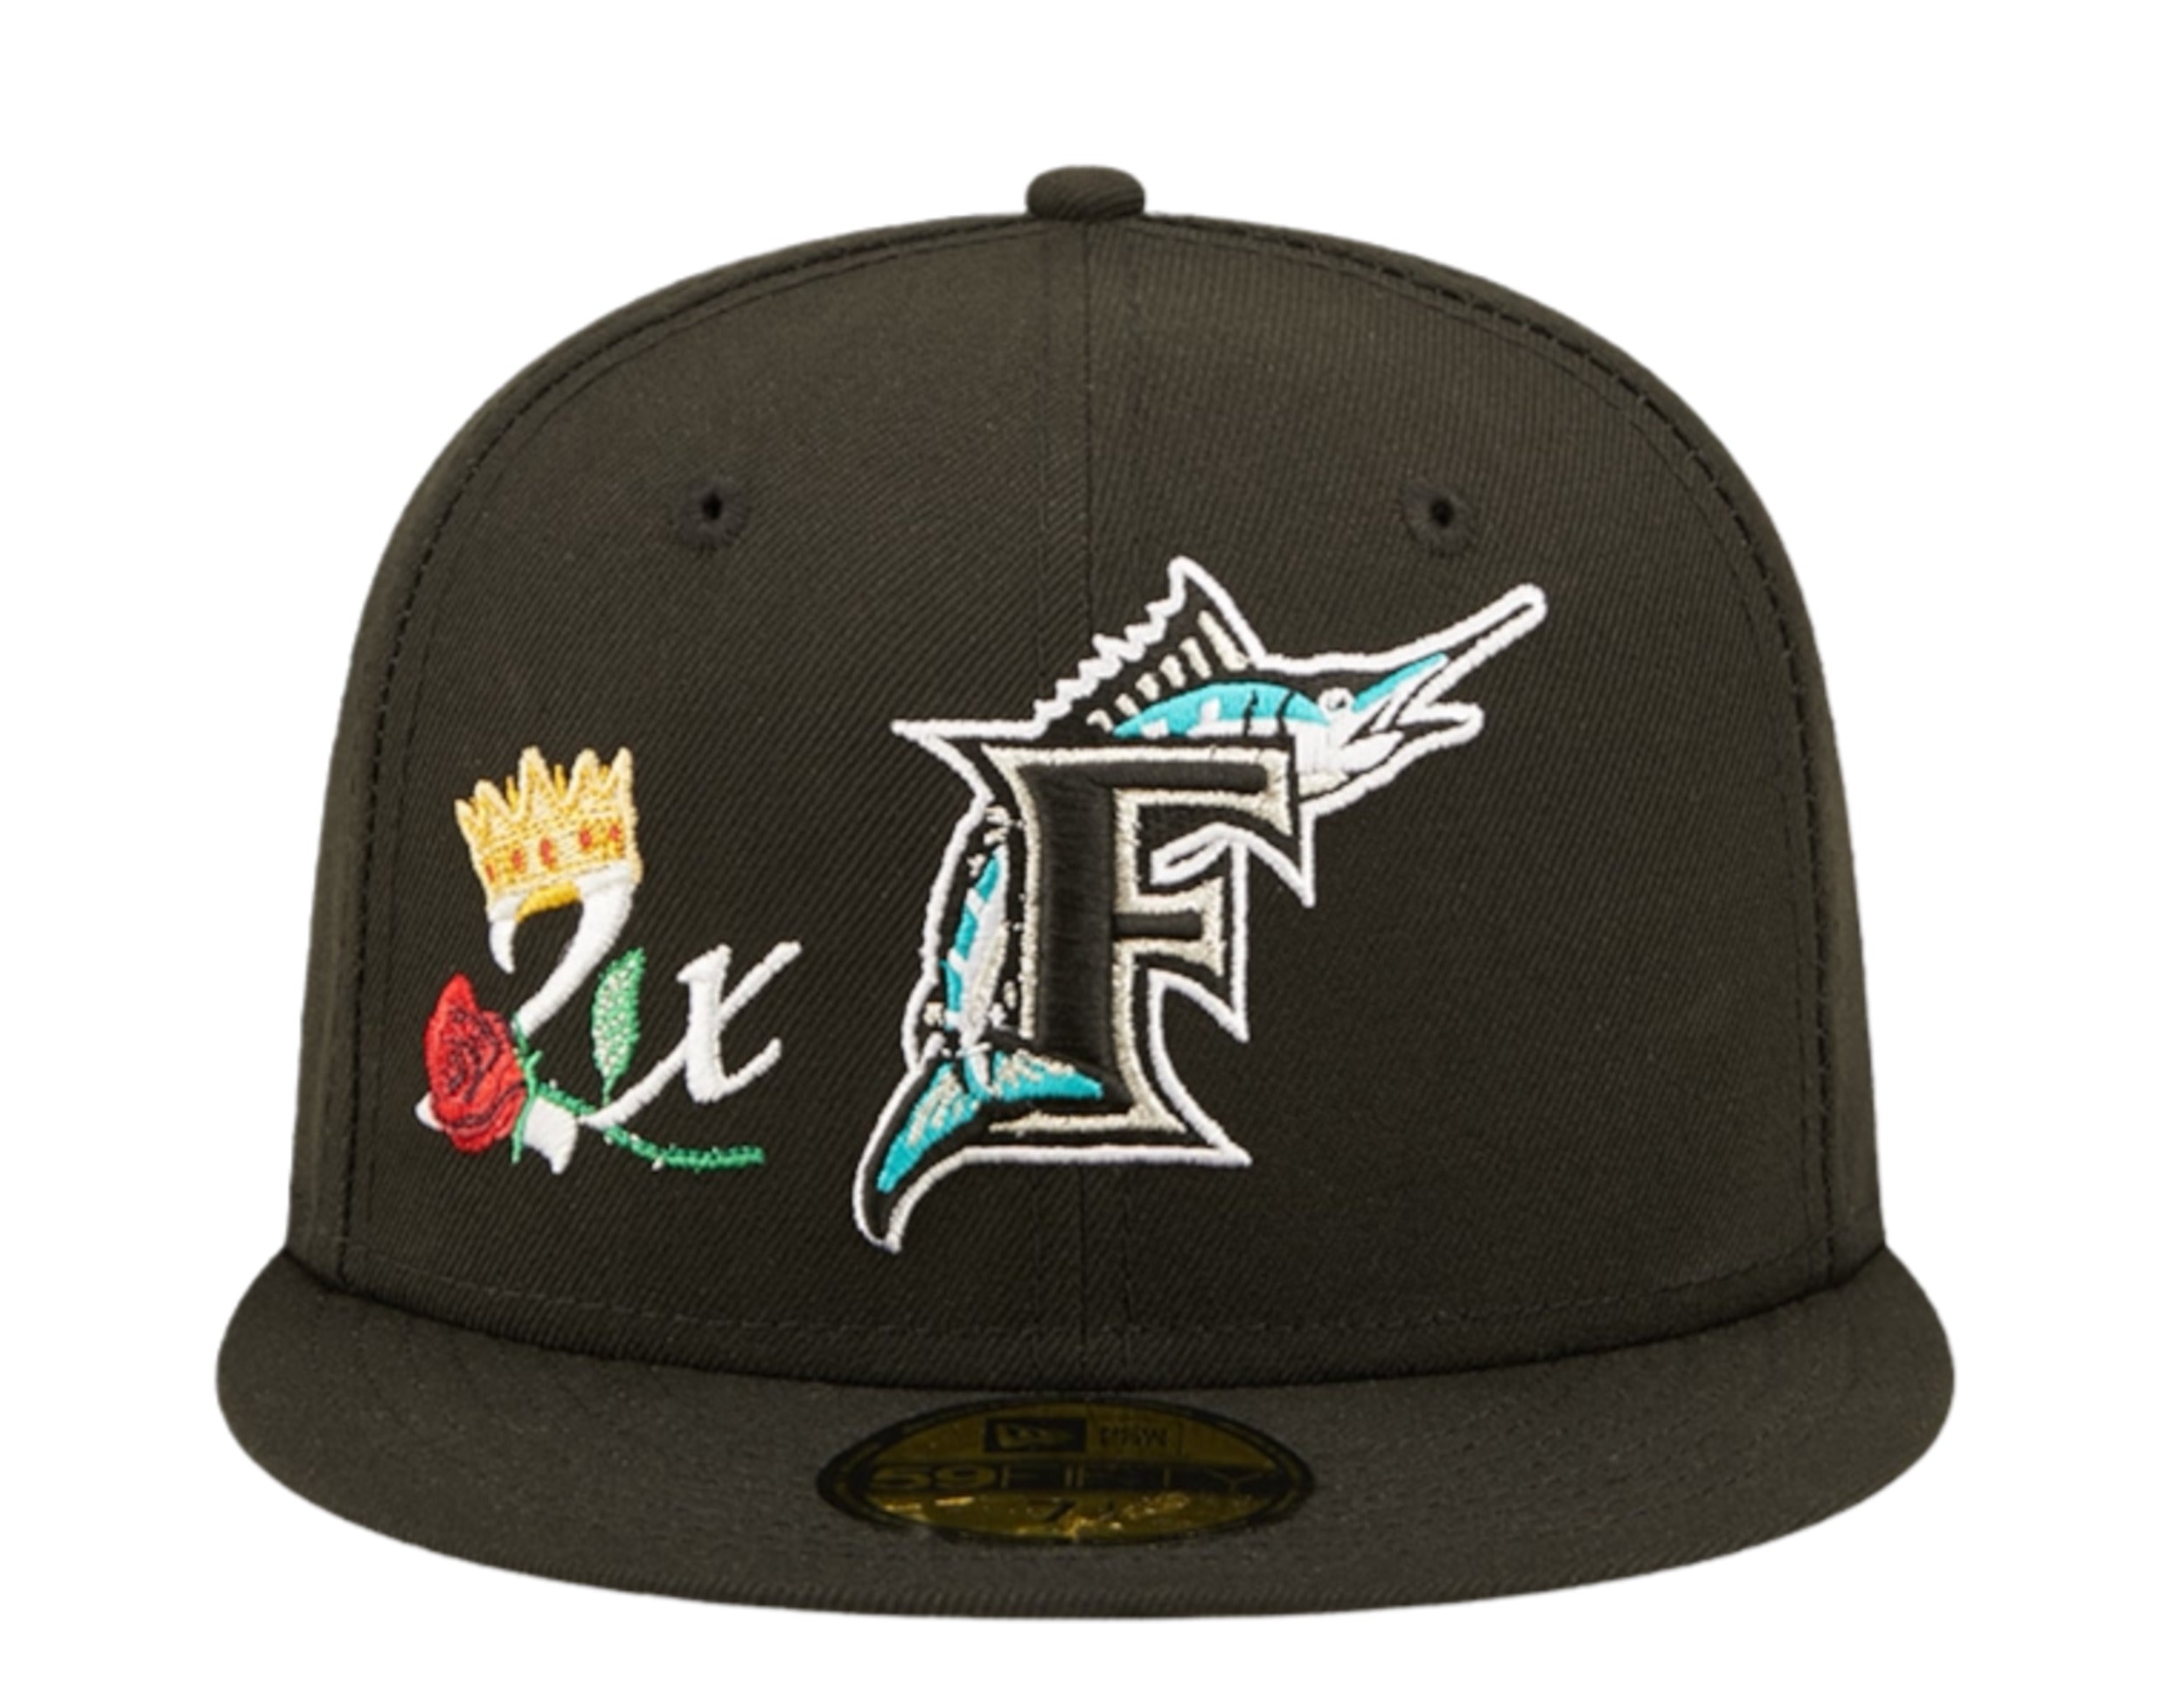 New Era Florida Marlins Cooperstown World Class 59FIFTY Fitted Hat